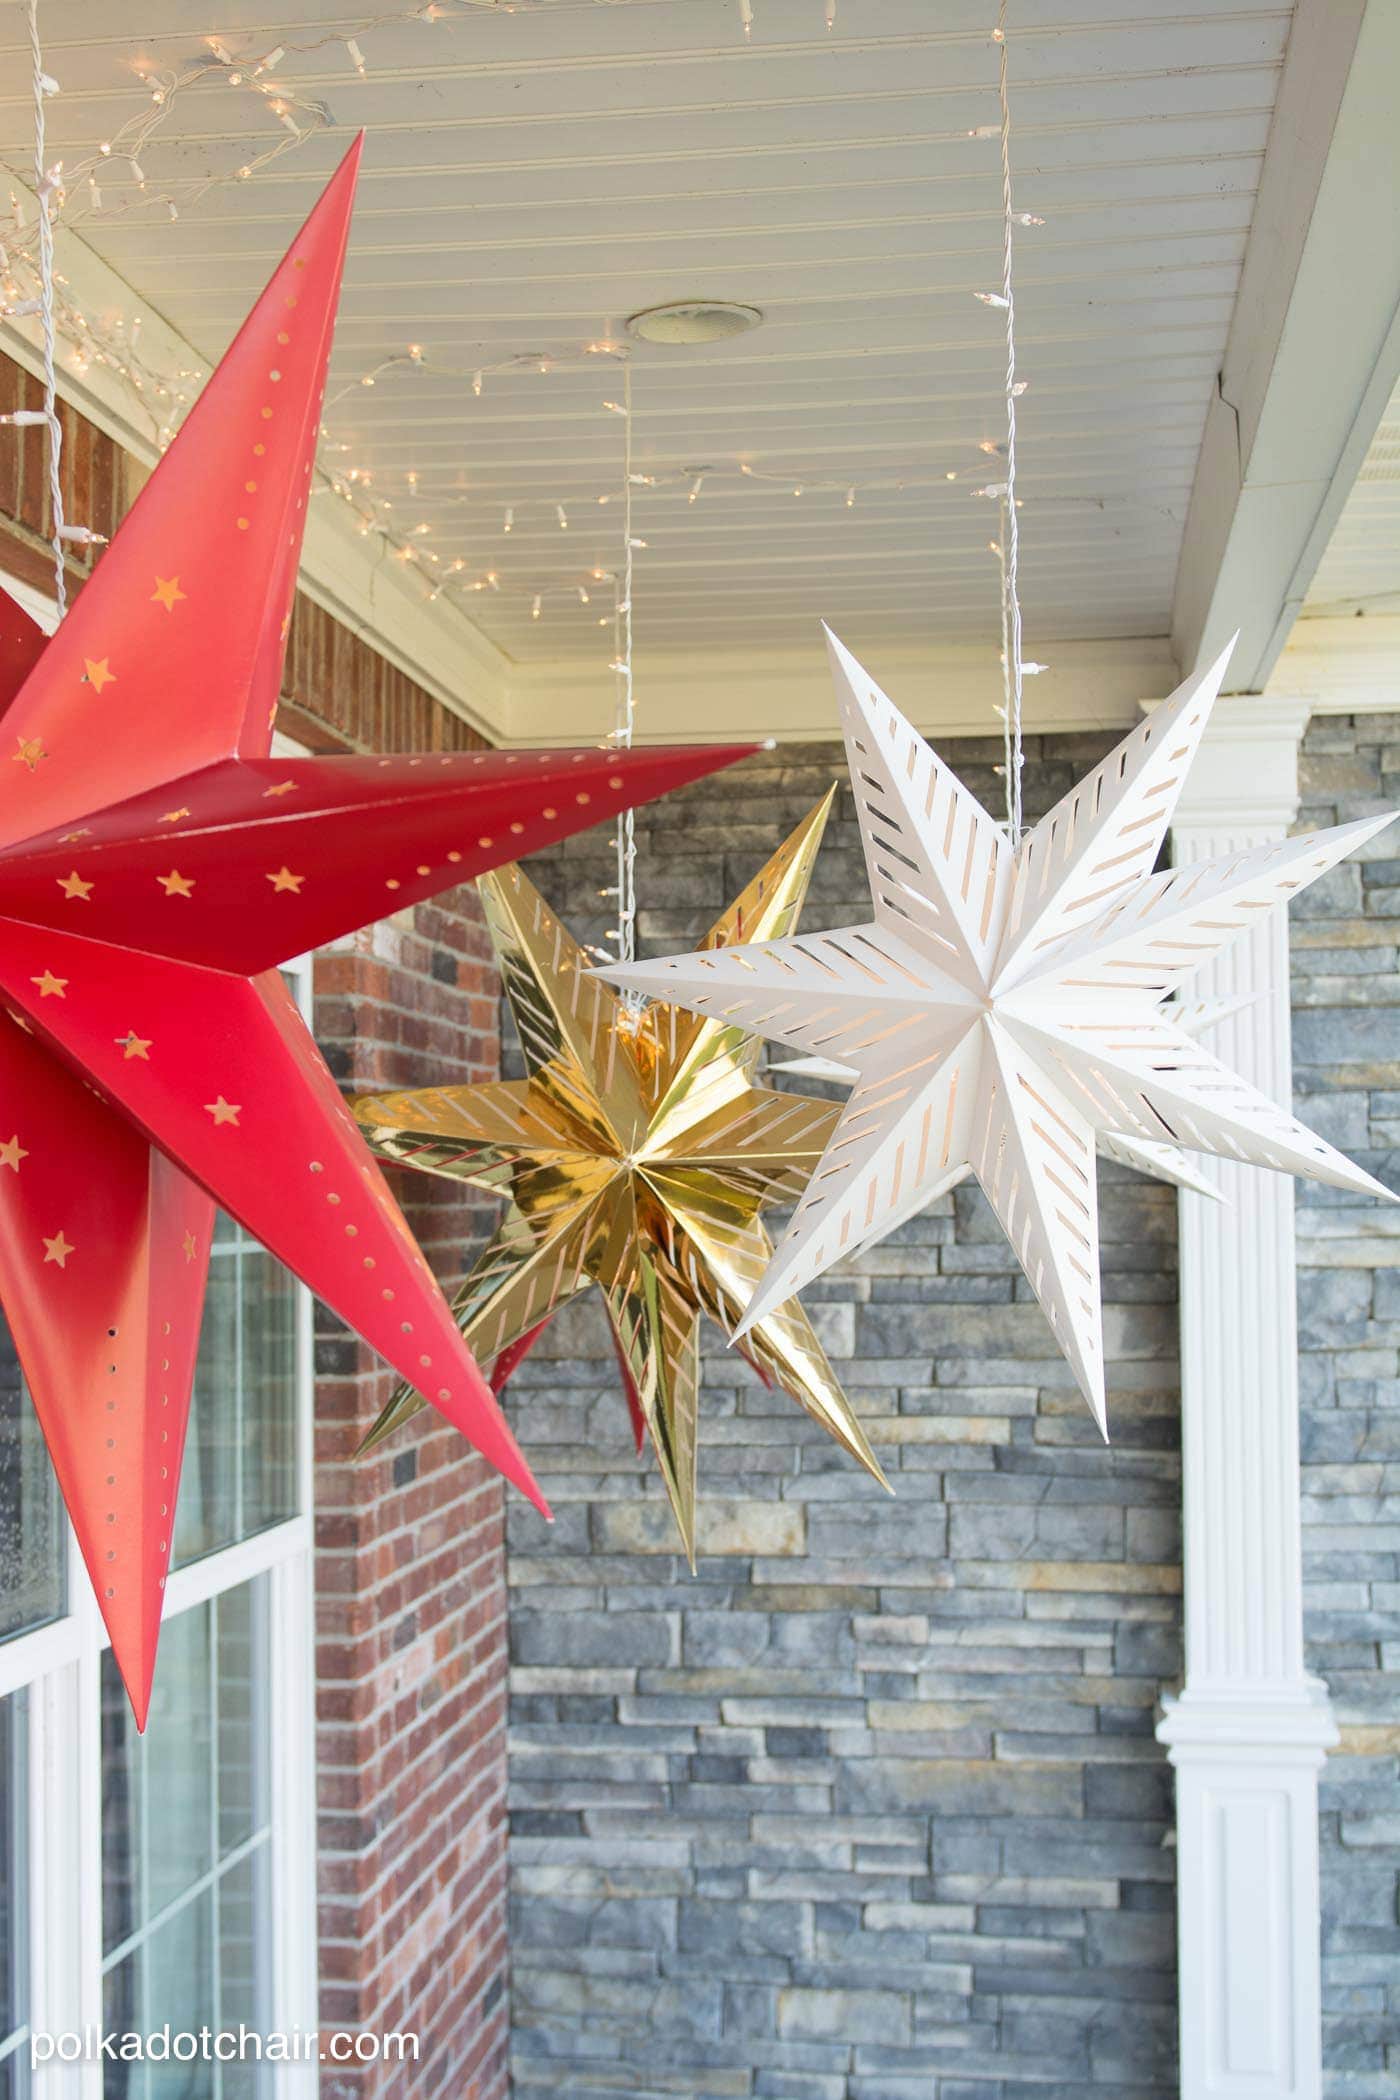 15 Christmas Ceiling Decorations To Make Christmas Special | Christmas  Celebrations | Christmas ceiling decorations, Christmas ceiling decorations  ideas, Office christmas decorations